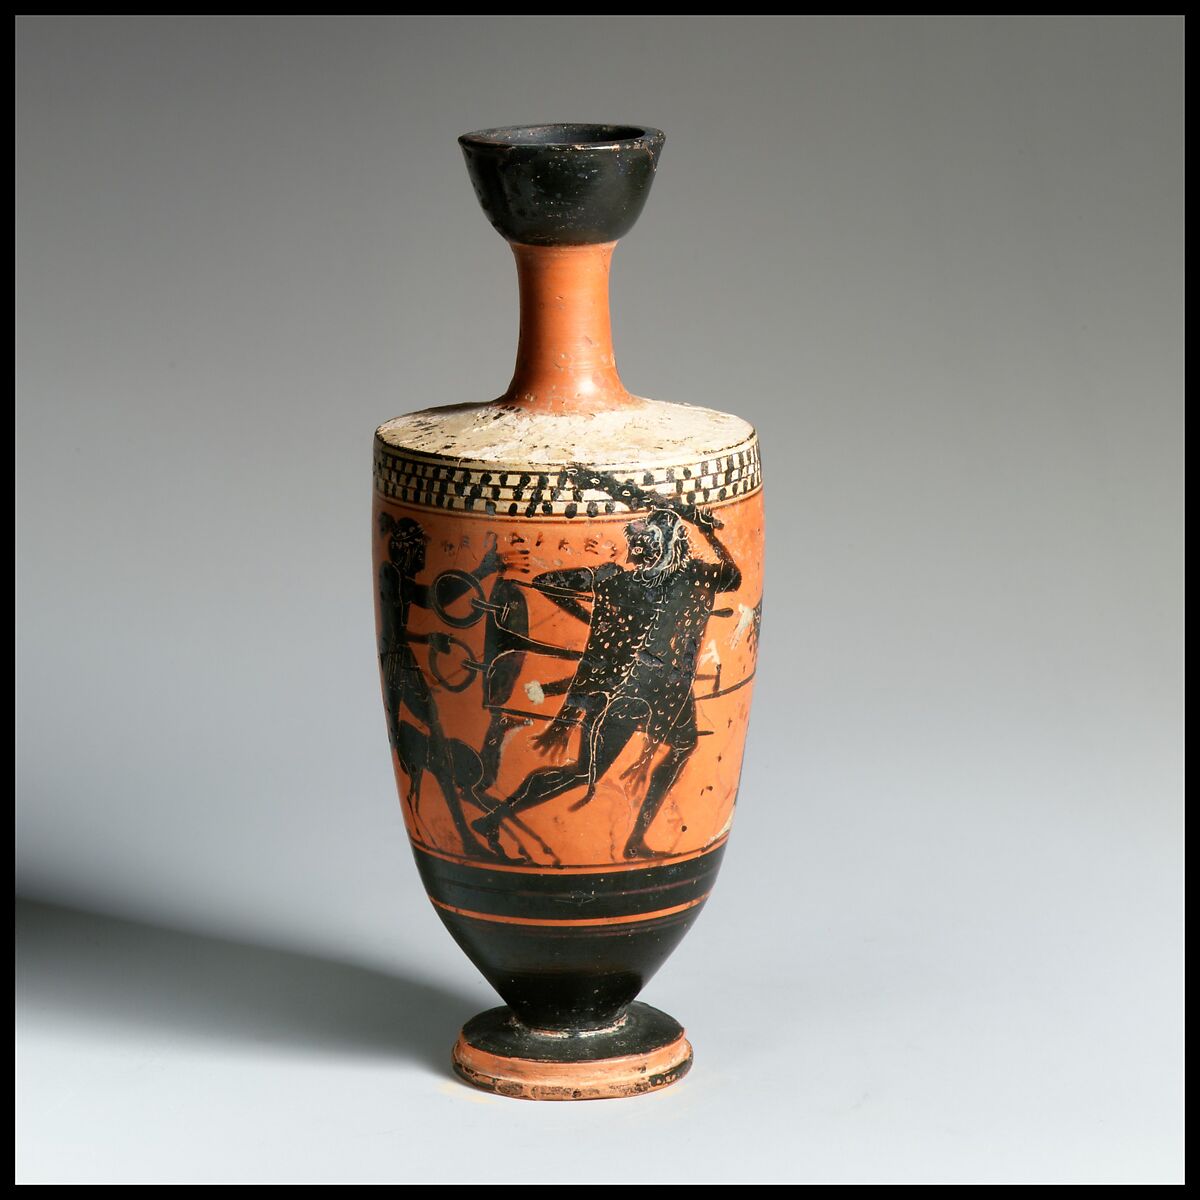 Terracotta lekythos (oil flask), Attributed to the manner of the Sappho Painter, Terracotta, Greek, Attic 